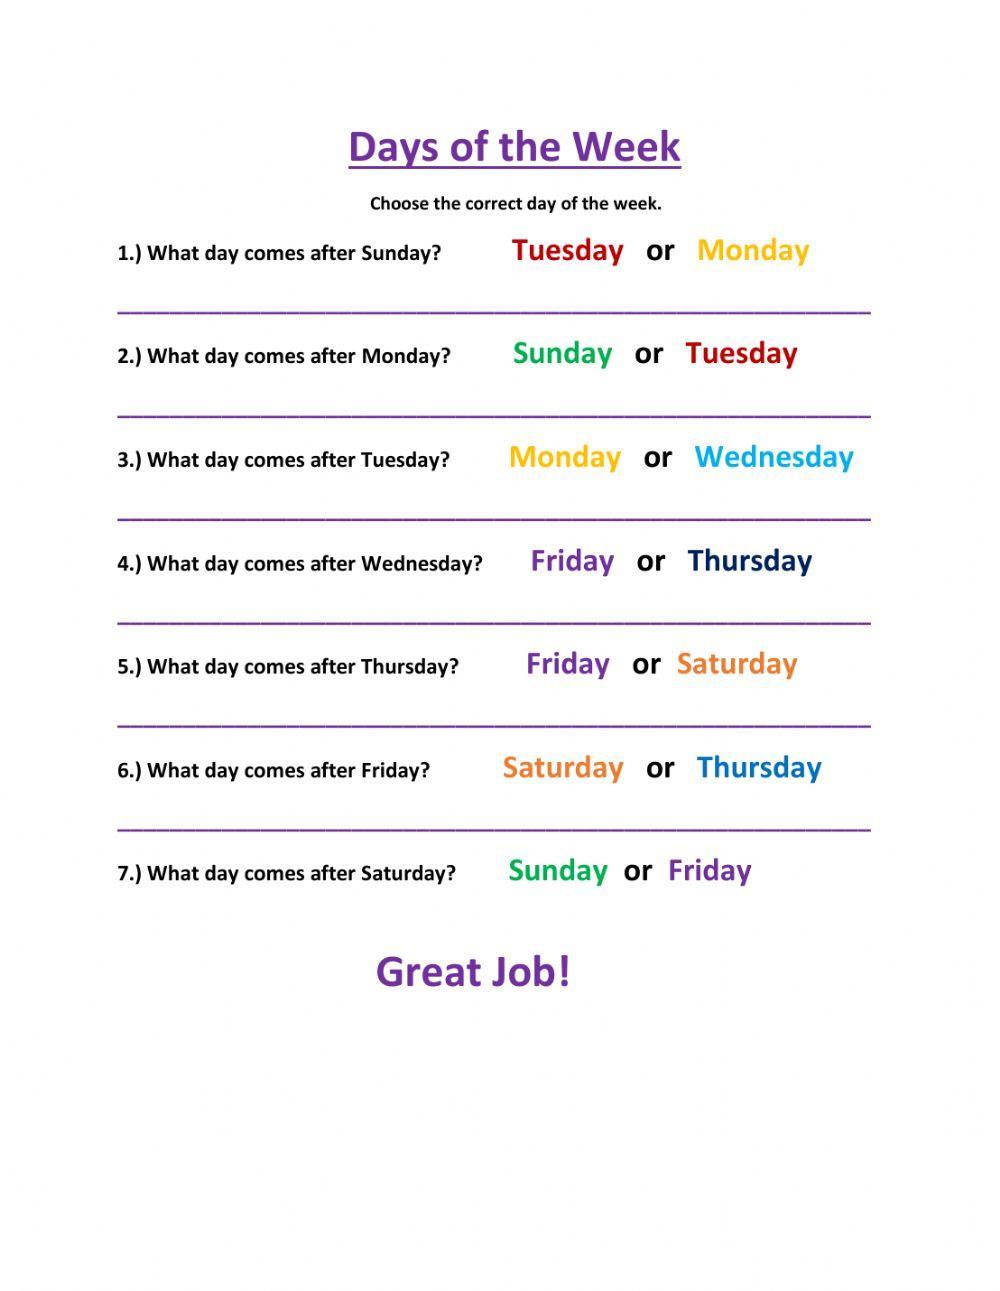 Days of the week-2